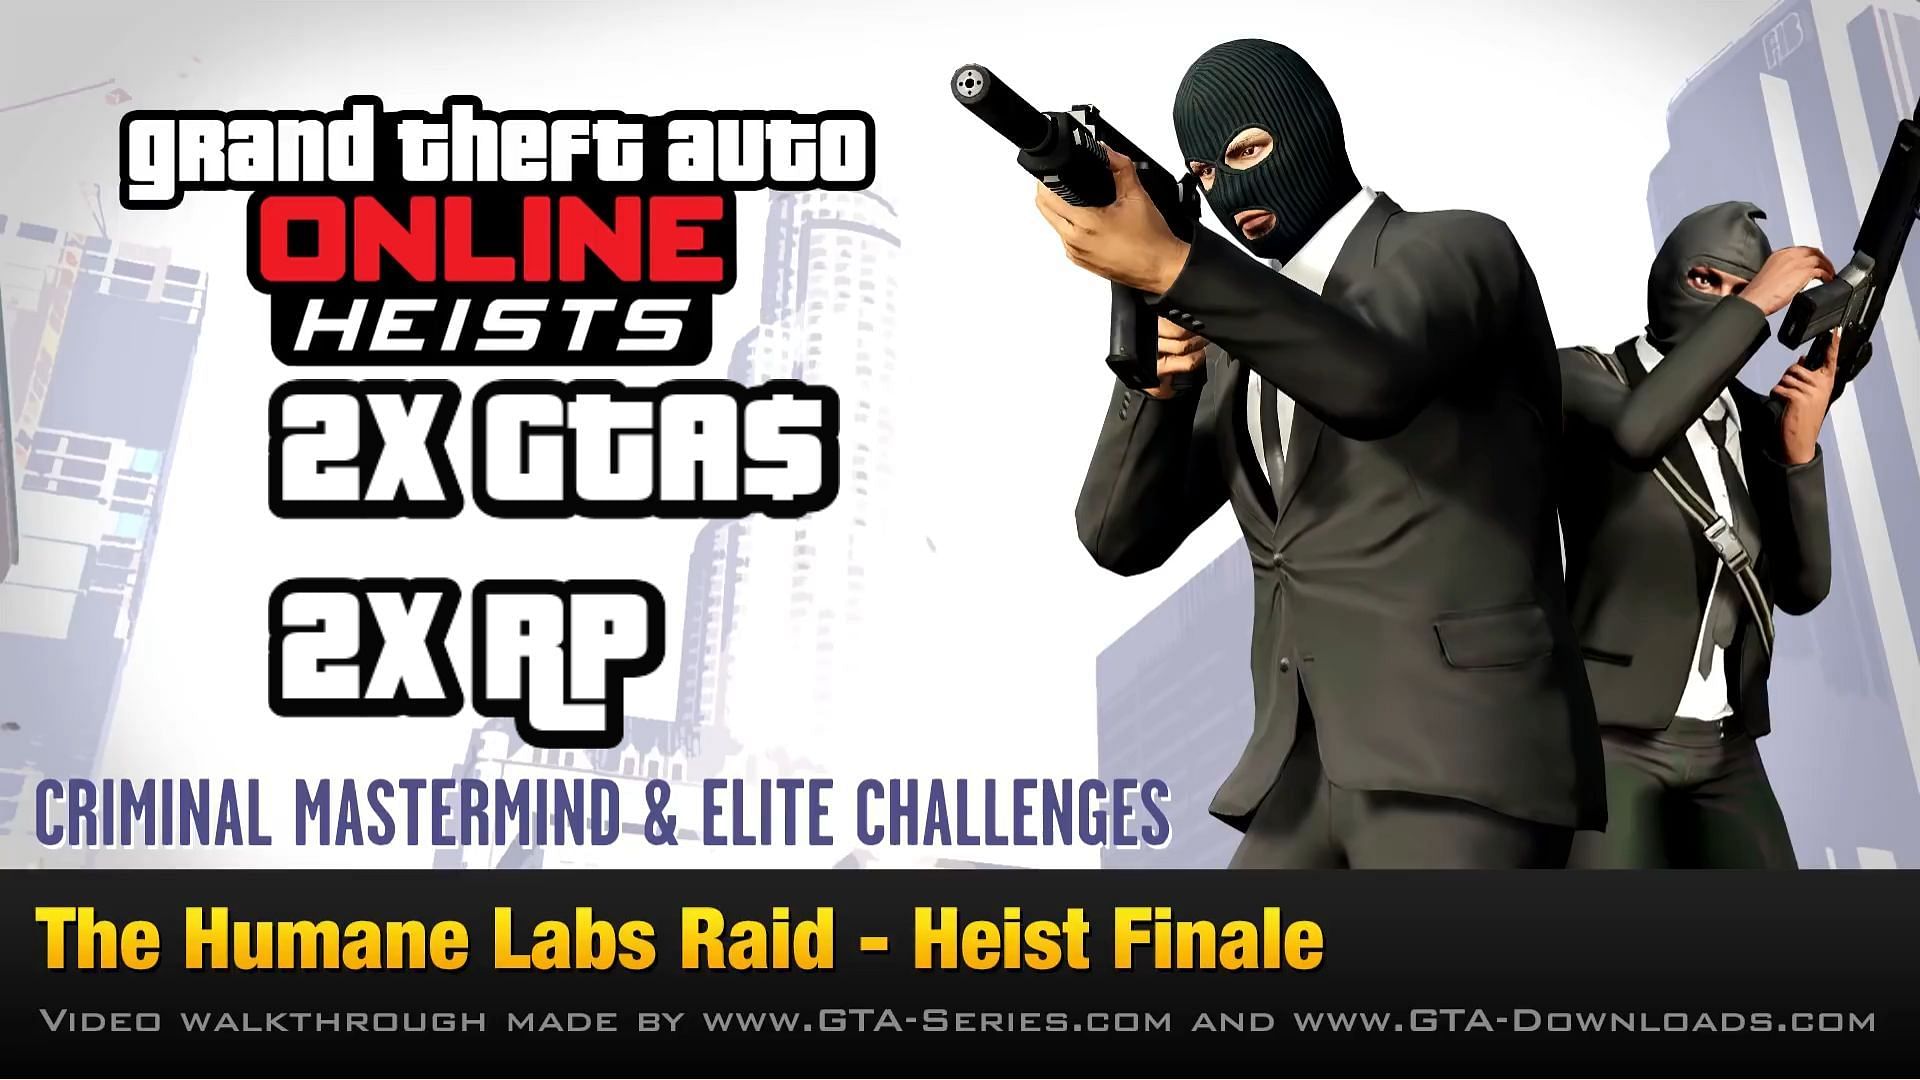 GTA Online has several new jobs marked for double the bonus throughout this week. (Image via YouTube/GTA Series Videos)